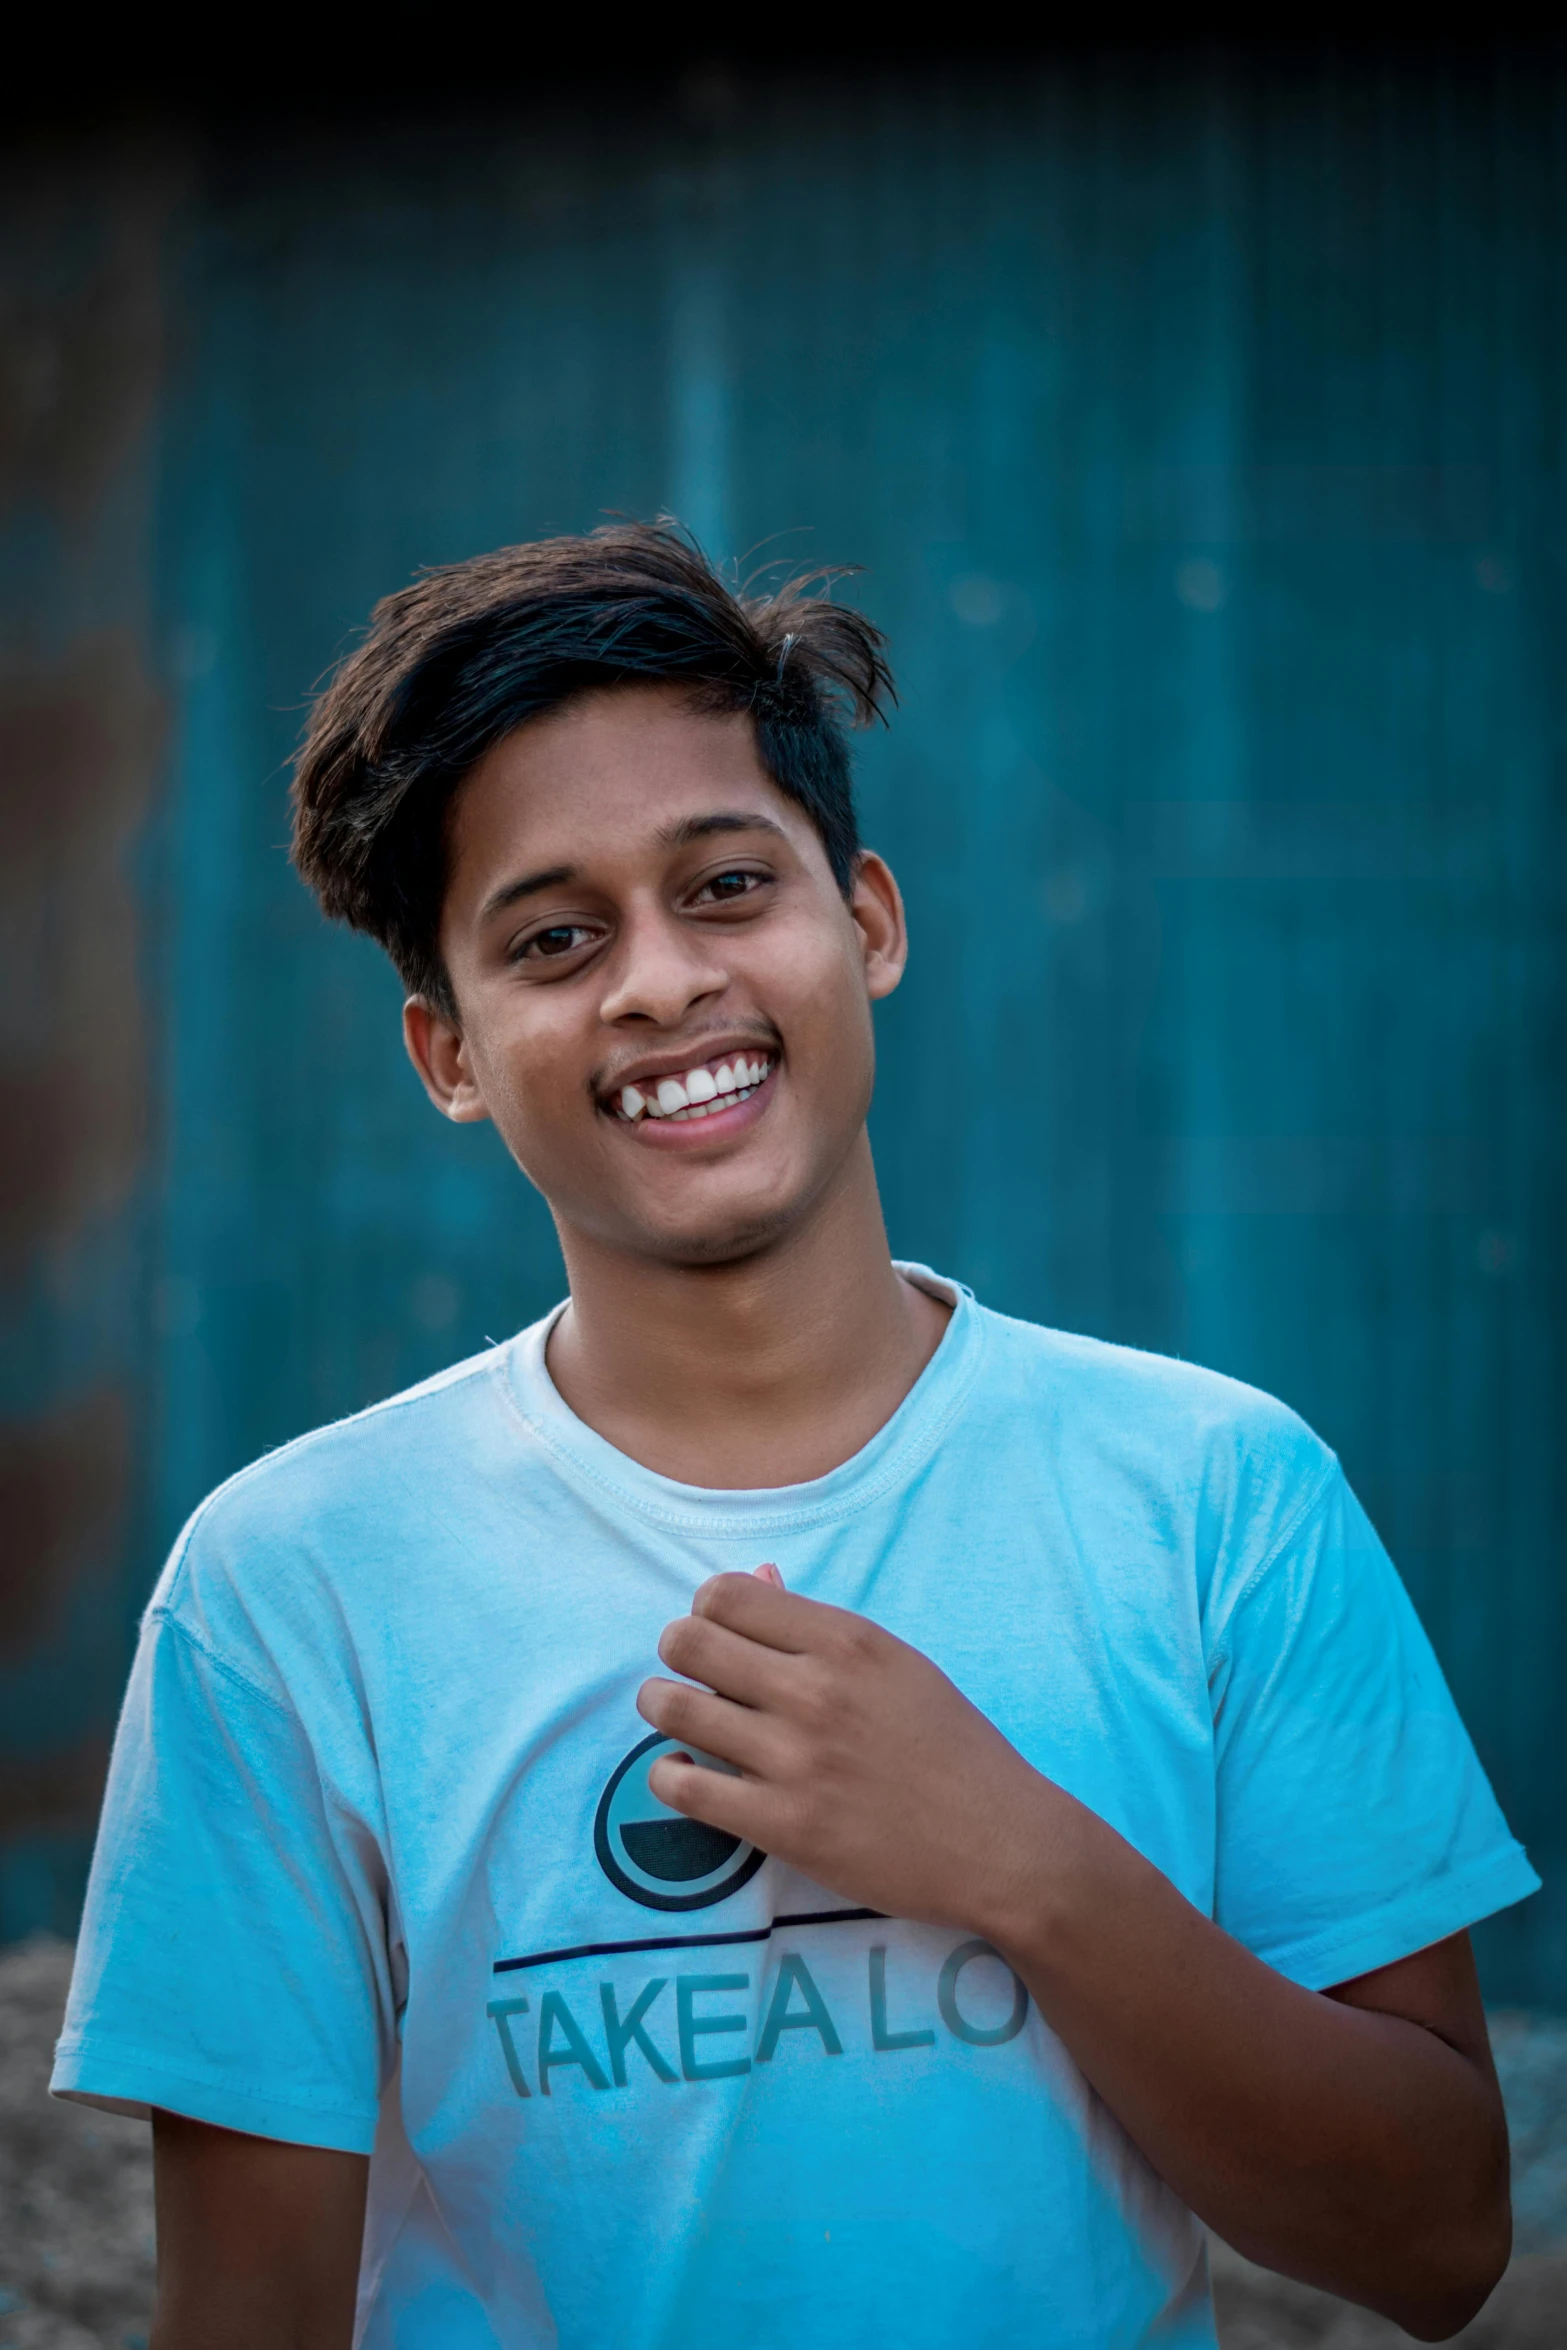 a boy wearing a blue tshirt posing for a picture